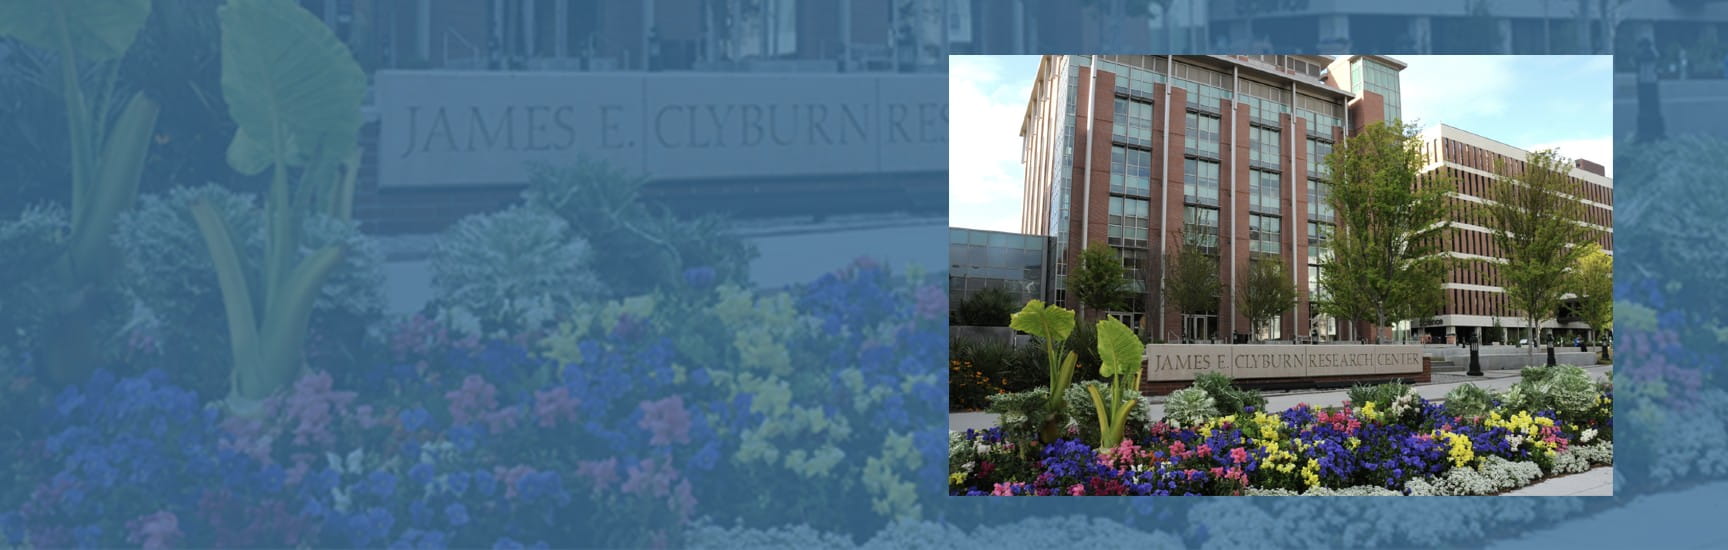 A flowerbed sits in front of a tall brick building and a sign that reads James E. Clyburn Research center 